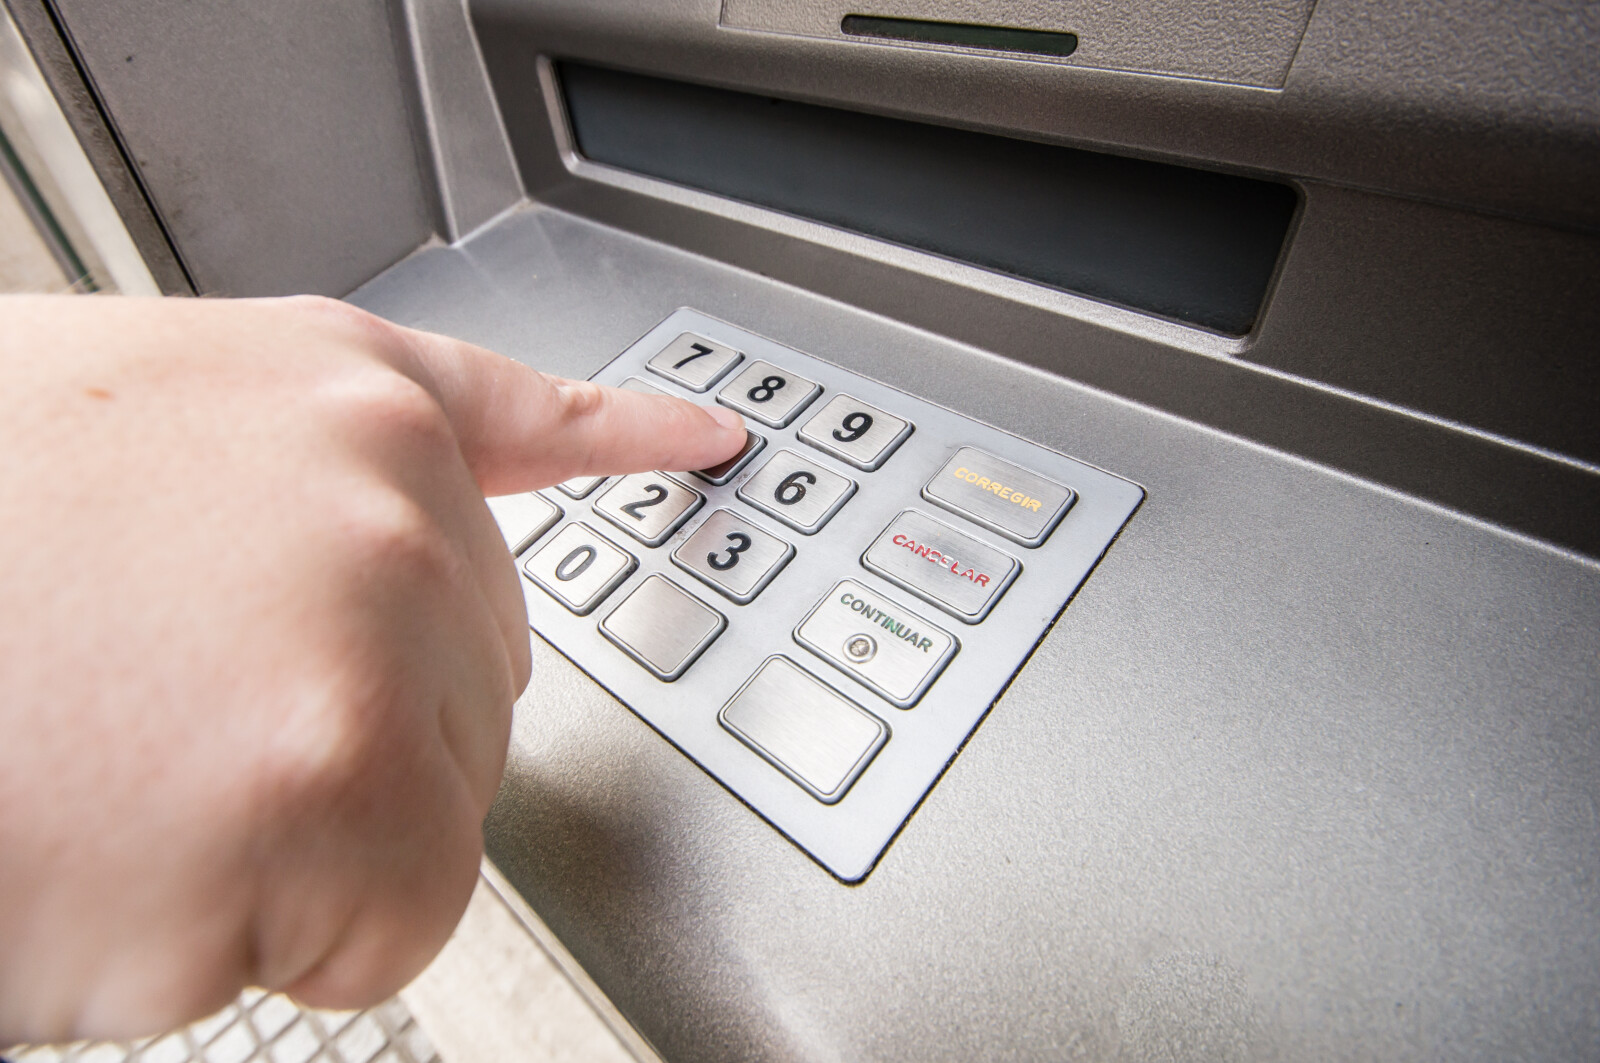 Can You Sue Your Bank for Unauthorized Transactions?